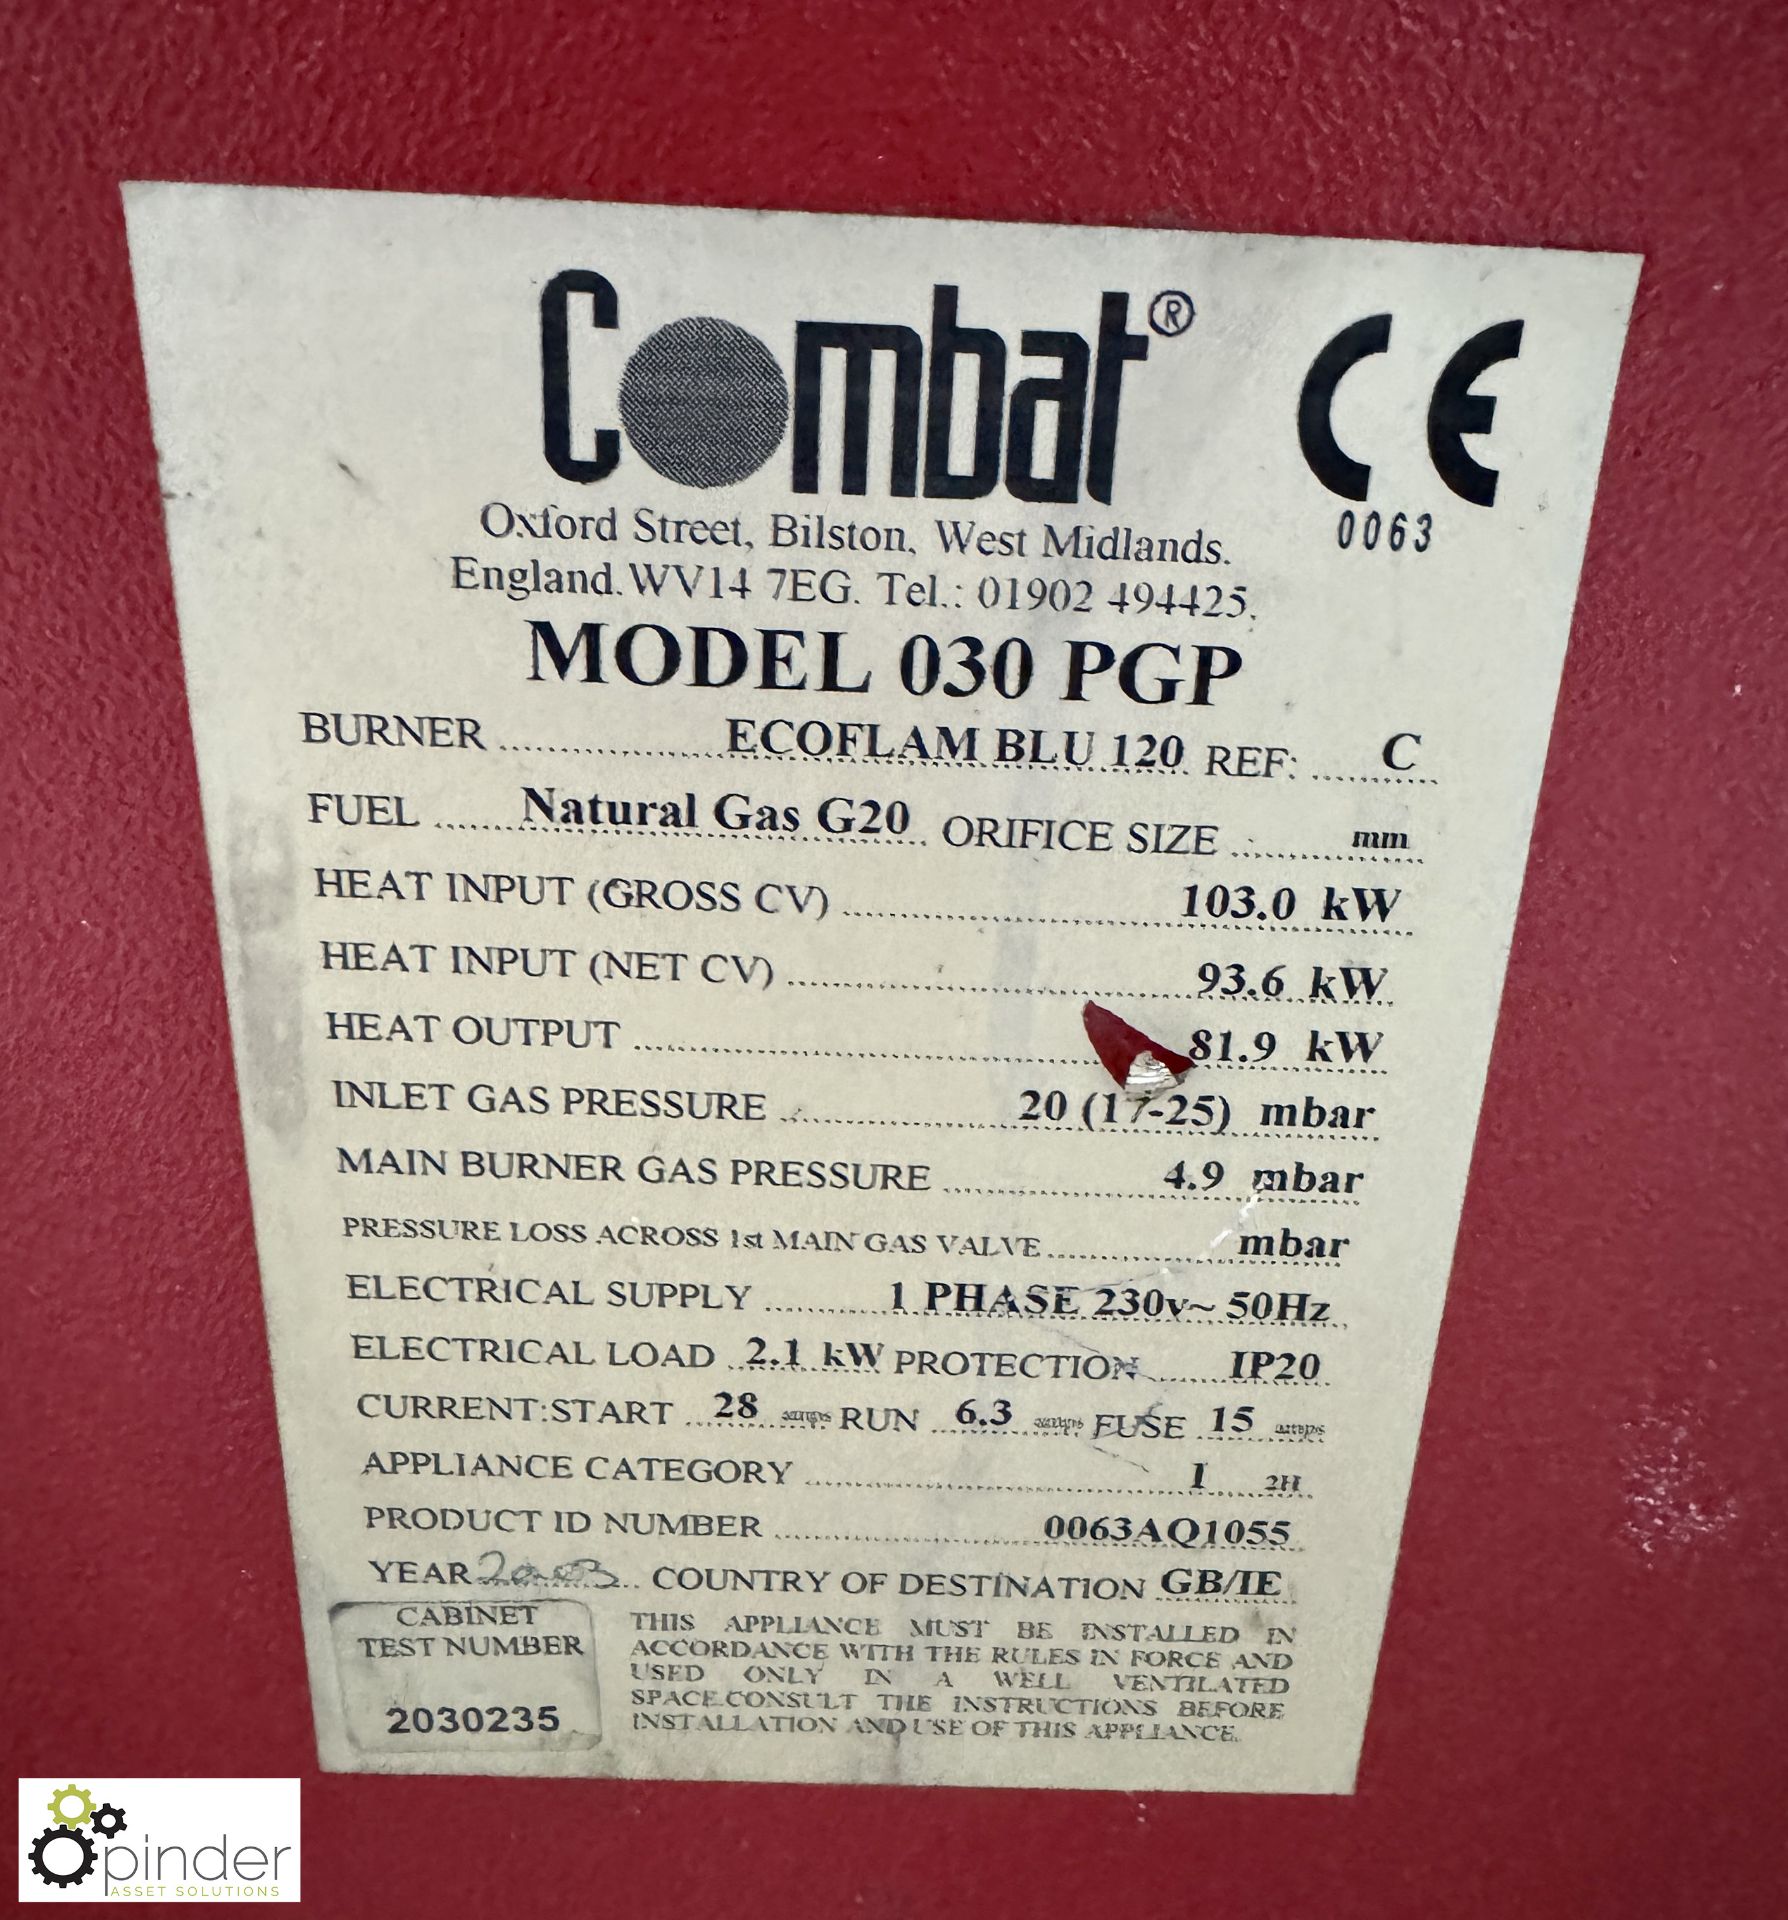 Combat 030 PGP gas fired floor standing Space Heater, burner Ecoflam BLU120, heat output 81.9kw, - Image 6 of 8